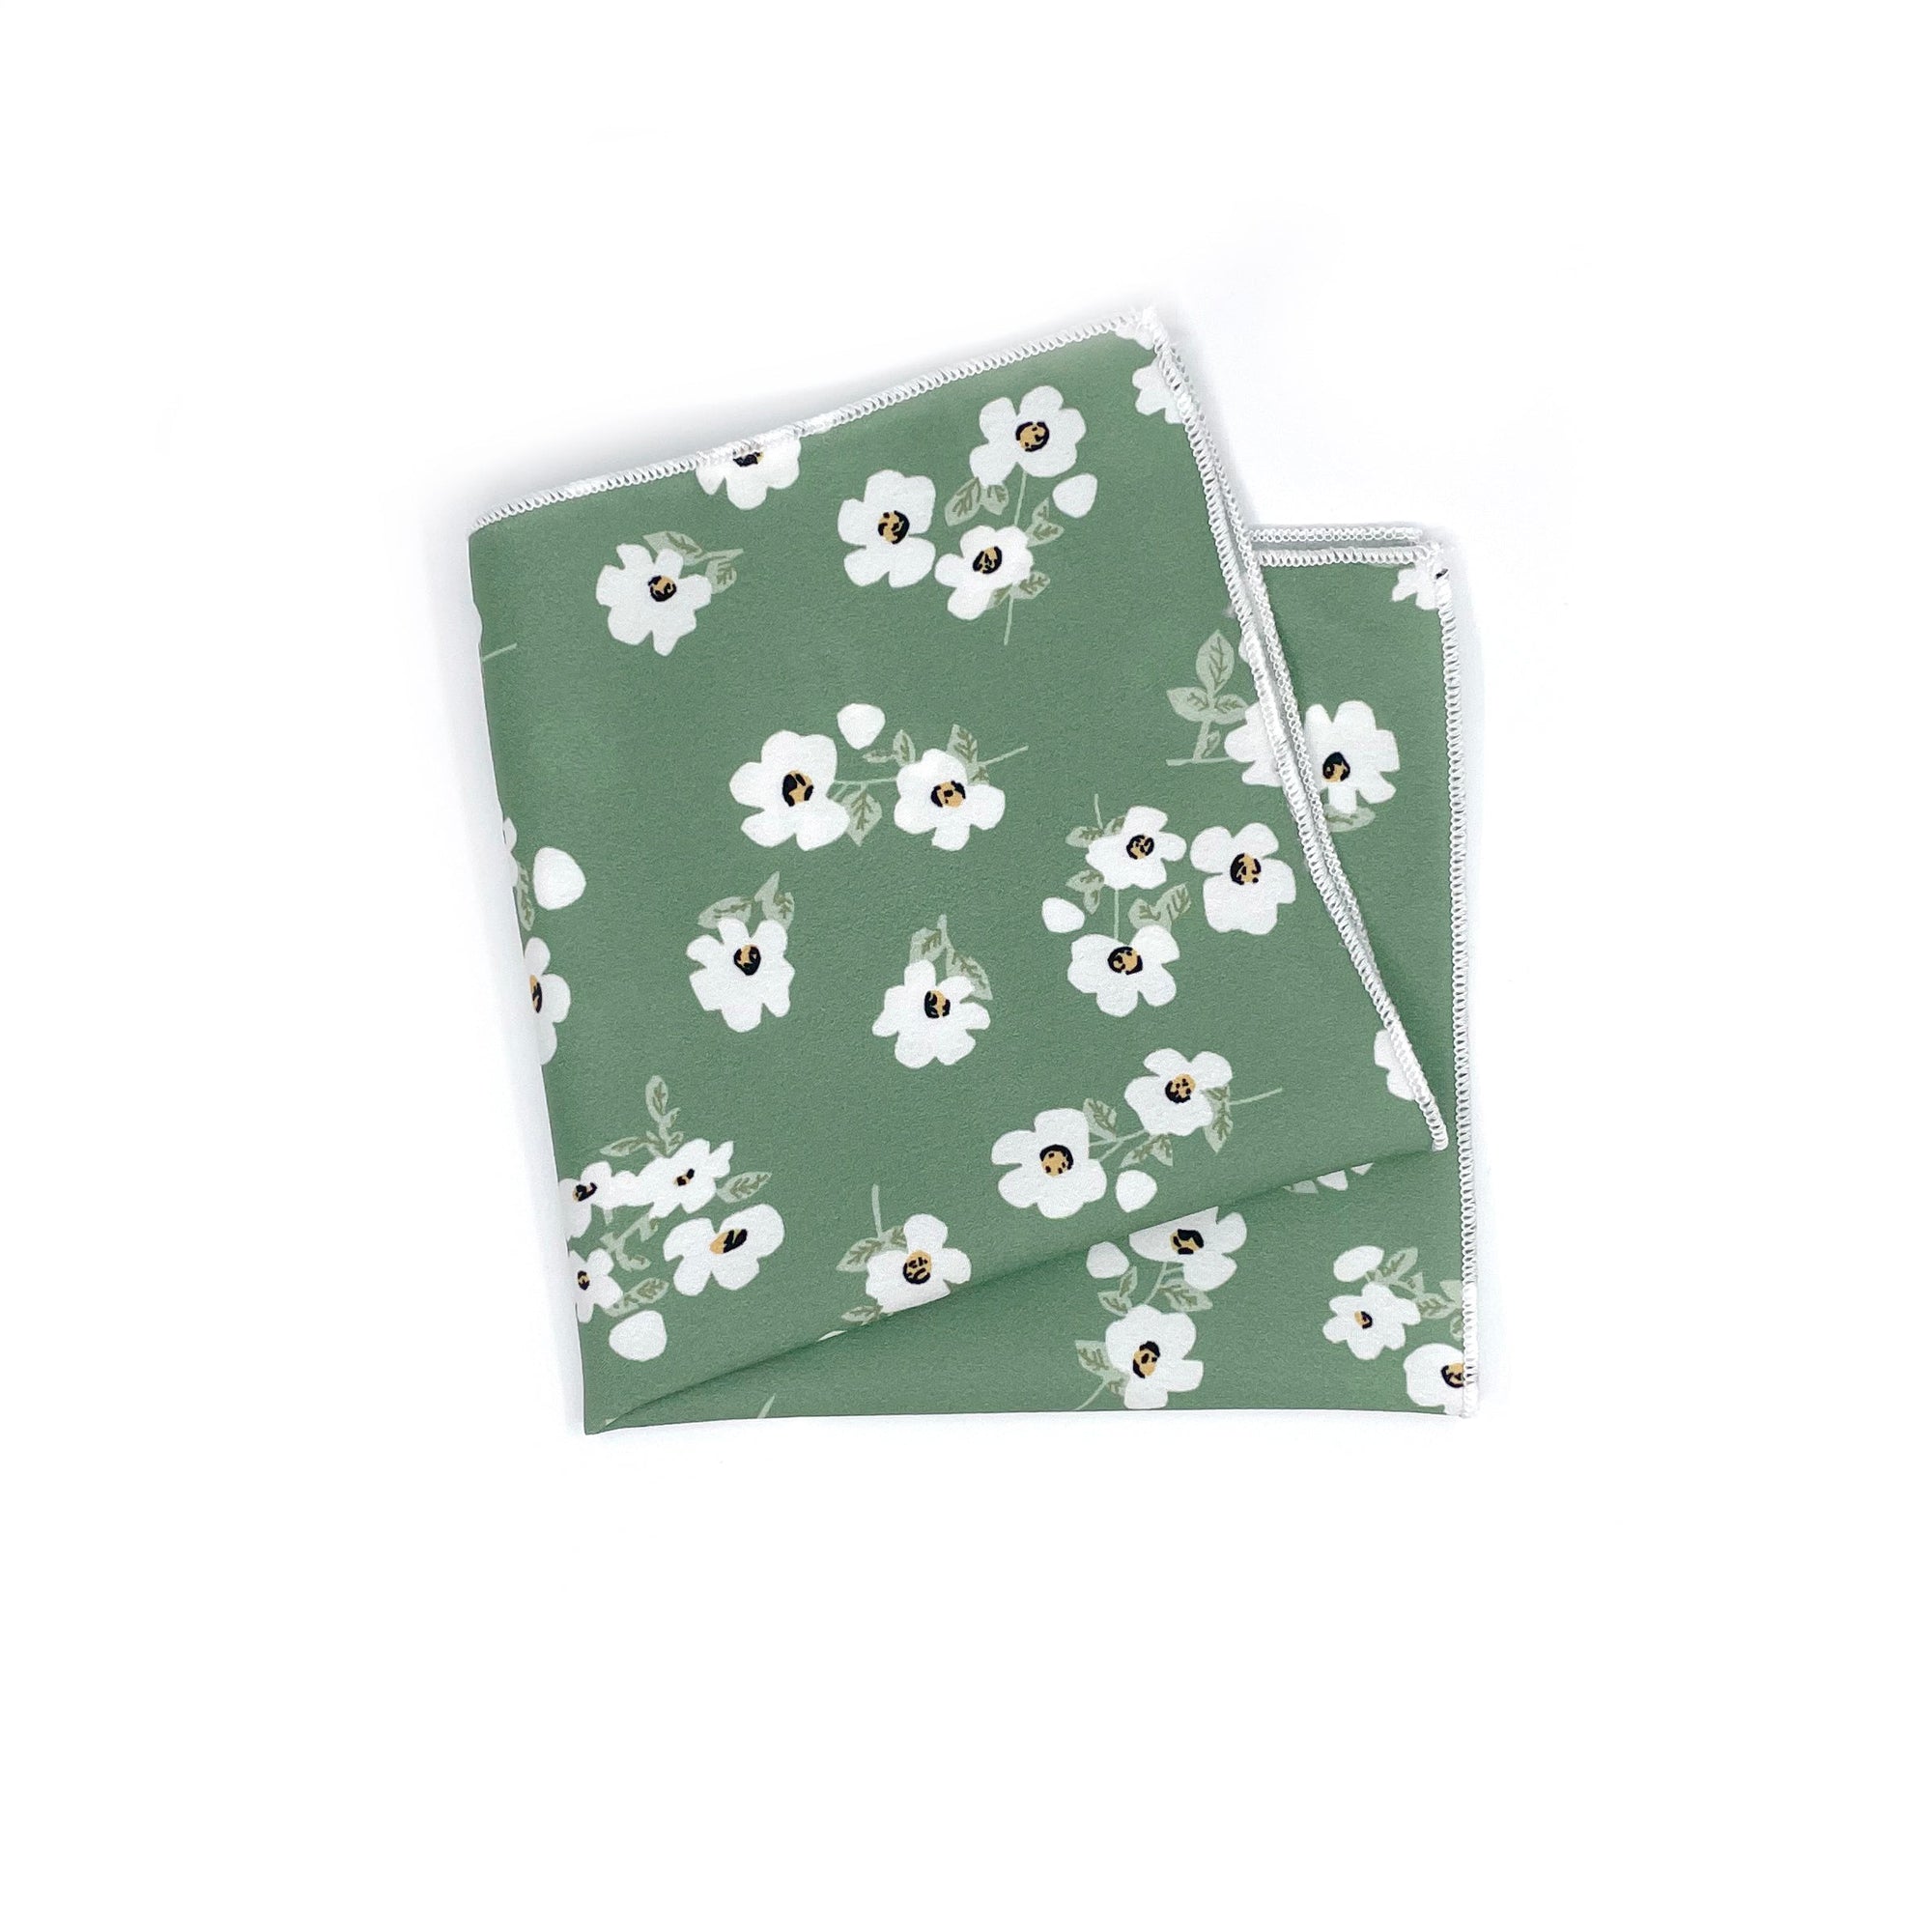 Sage Green Floral Pocket Square AUGUST Mytieshop Sage Green Floral Pocket square Color: Green Item Length: 23 cm ( 9 inches)Item Width : 22 cm (8.6 inches) Matching Necktie Add a touch of elegance to your look with this AUGUST Floral Pocket Square. Made with high-quality fabric, as a result this pocket square is perfect for any formal occasion. The beautiful floral design is sure to make you stand out from the crowd, and whether you're attending a wedding, a job interview, or a fancy dinner part